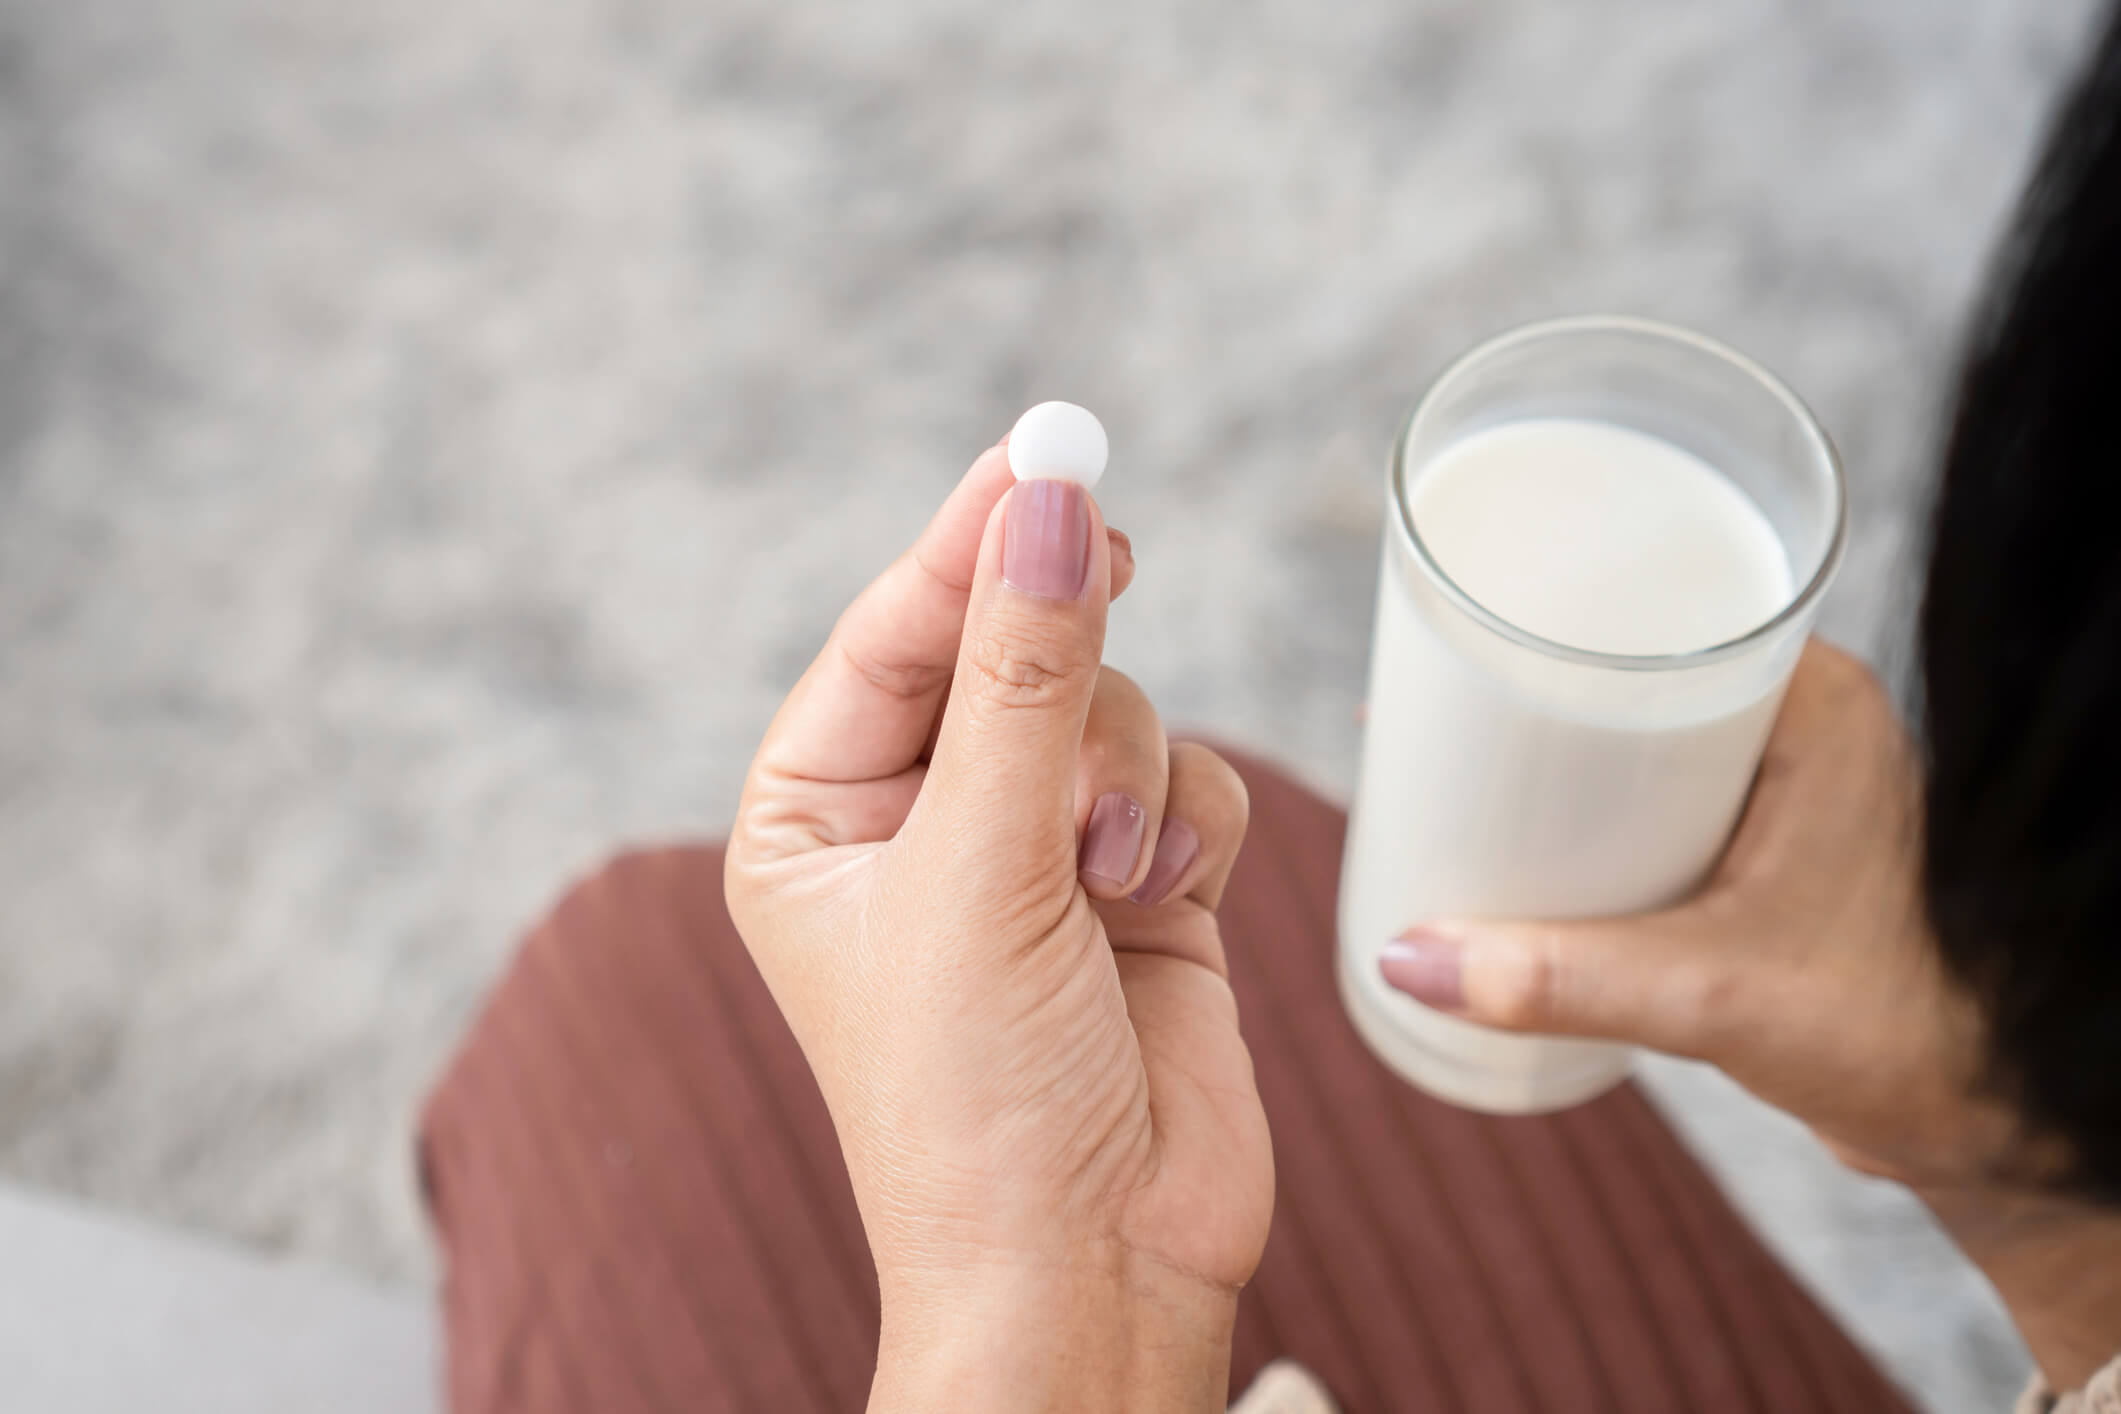 This is a photo from the perspective of a woman looking down at her hands. In one hand there is a pill, and in the other is a glass of milk.